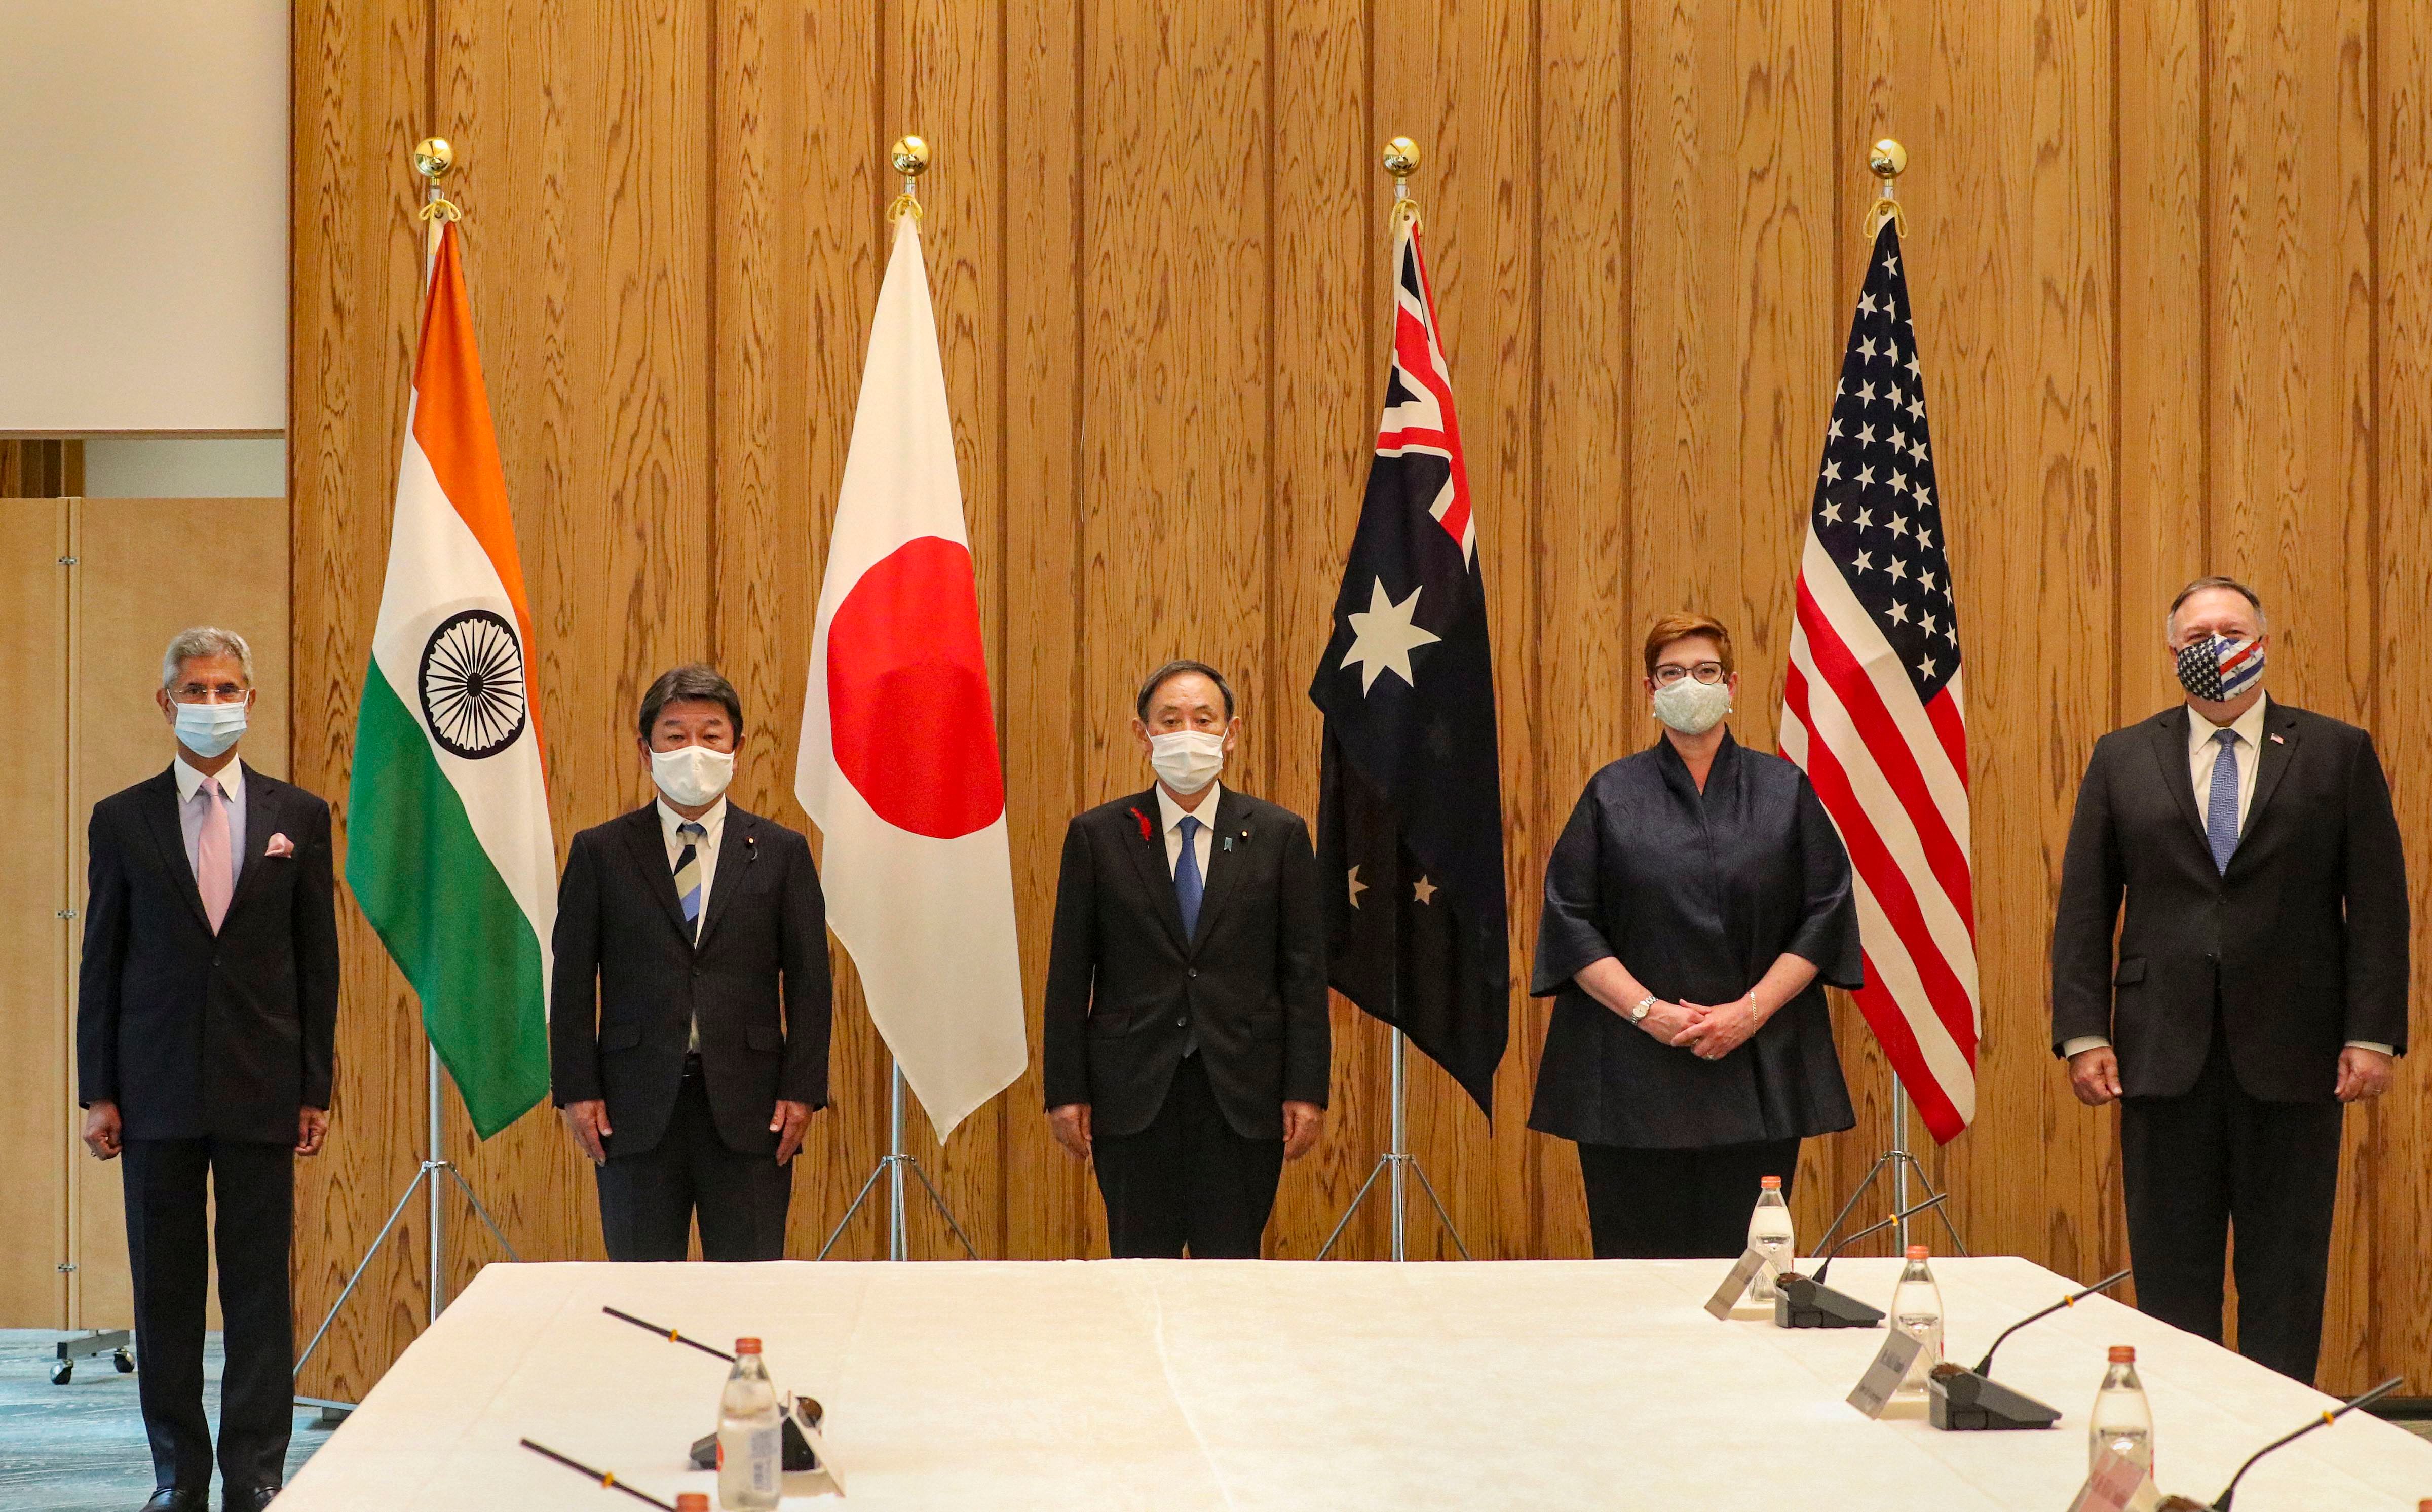 External Affairs Minister S.Jaishankar meets Yoshihide Suga, Prime Minister of Japan along with other Quad Foreign Ministers, in Tokyo, Tuesday, Oct. 6, 2020. Credit: MEA/PTI Photo